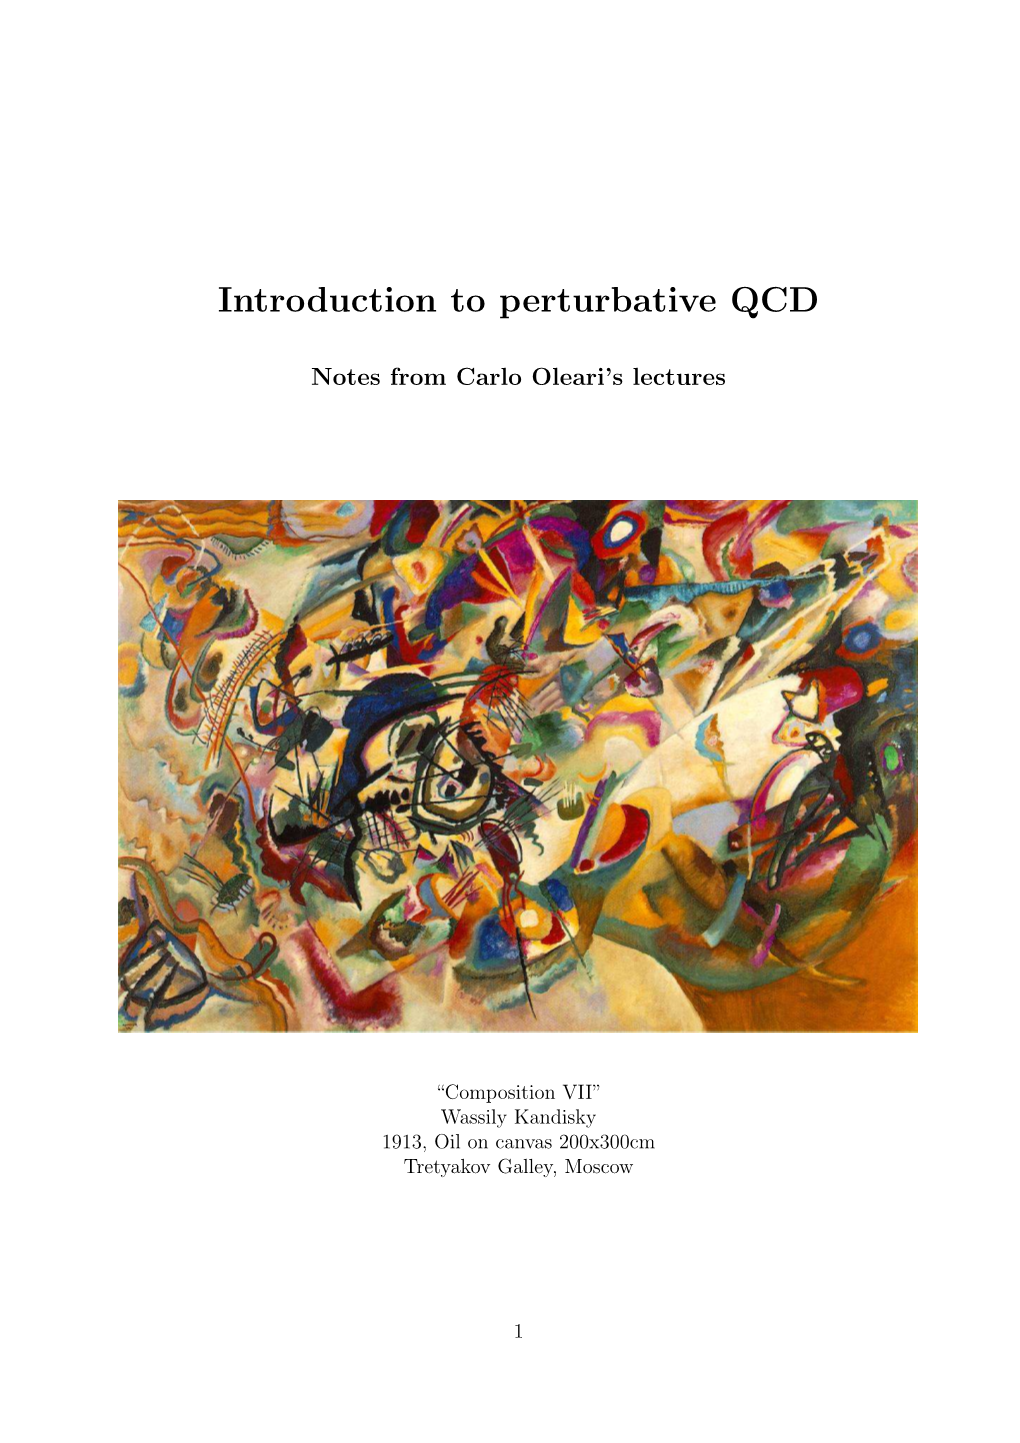 Introduction to Perturbative QCD